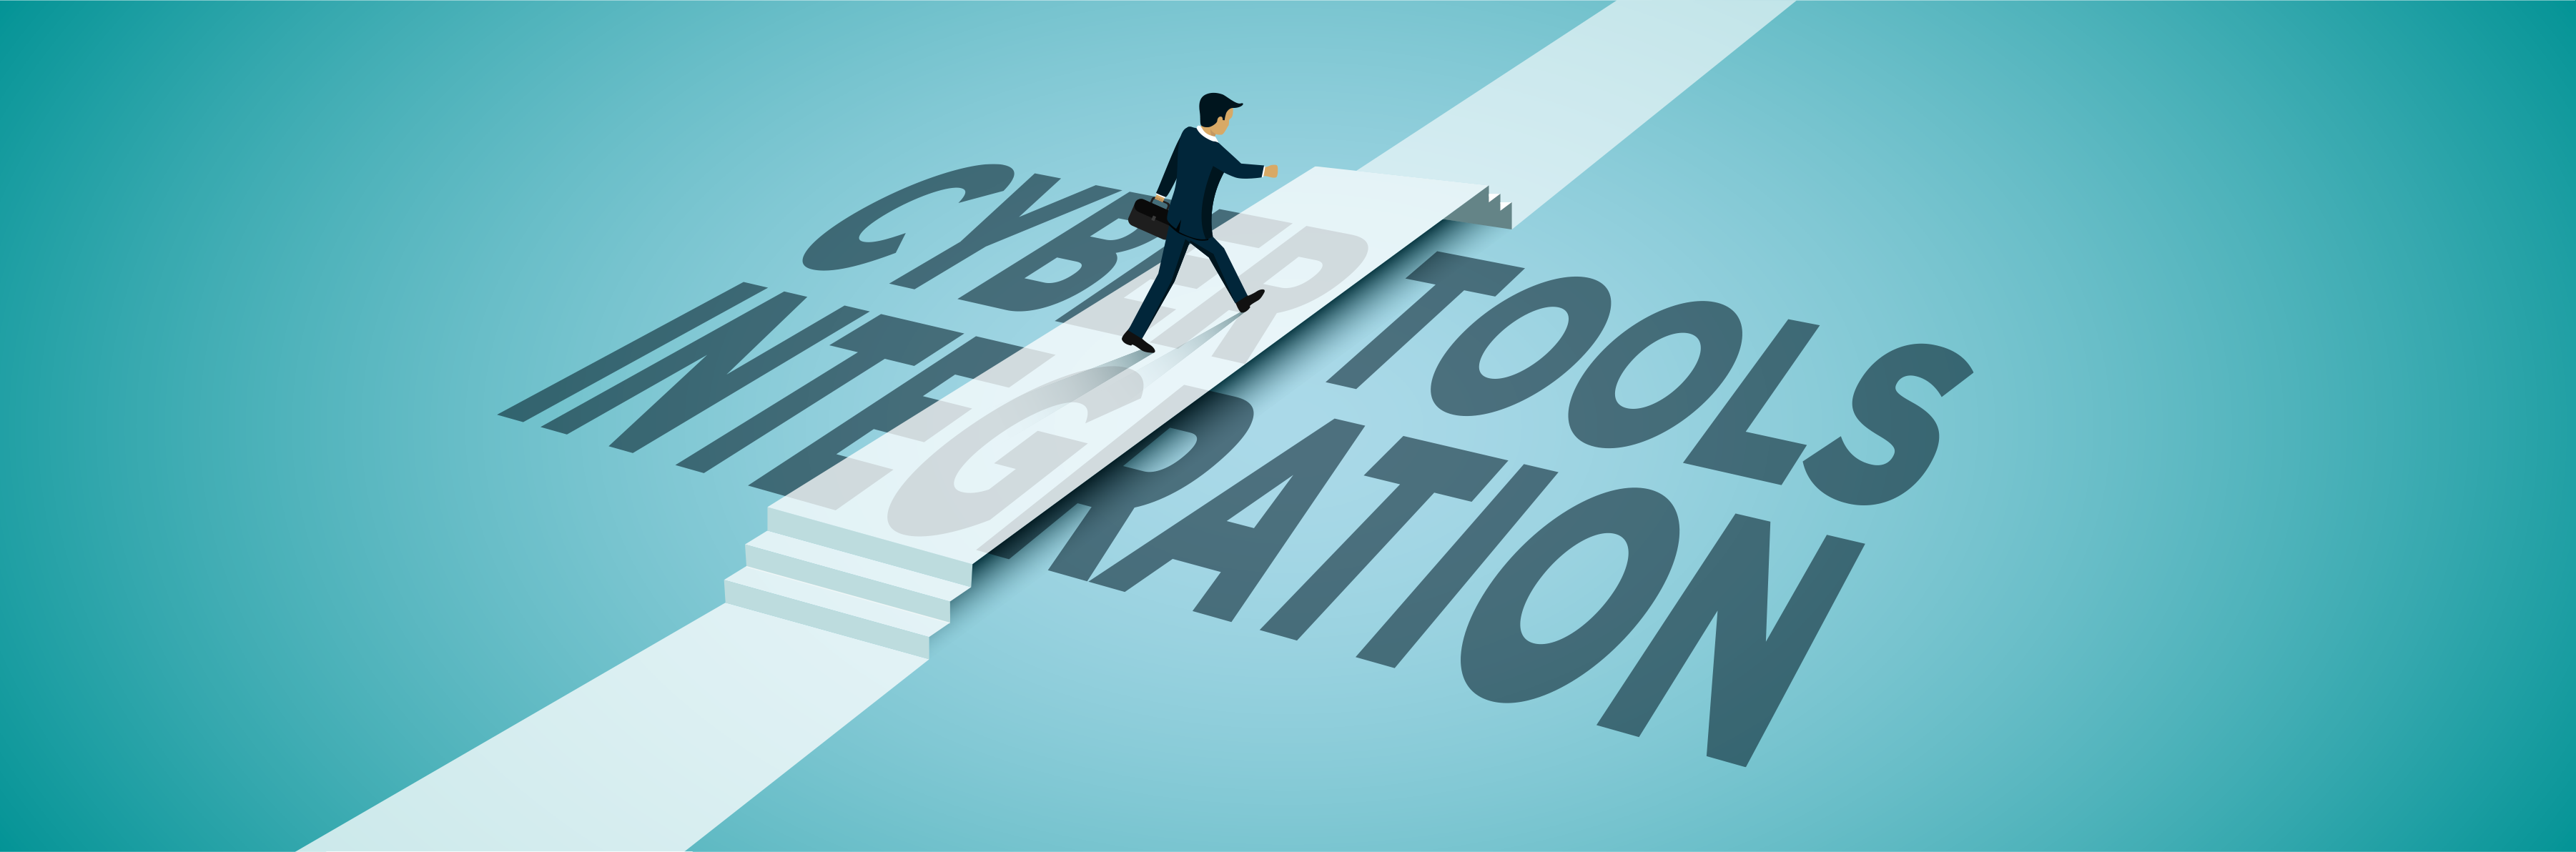 Cyber Tools Integration Banner